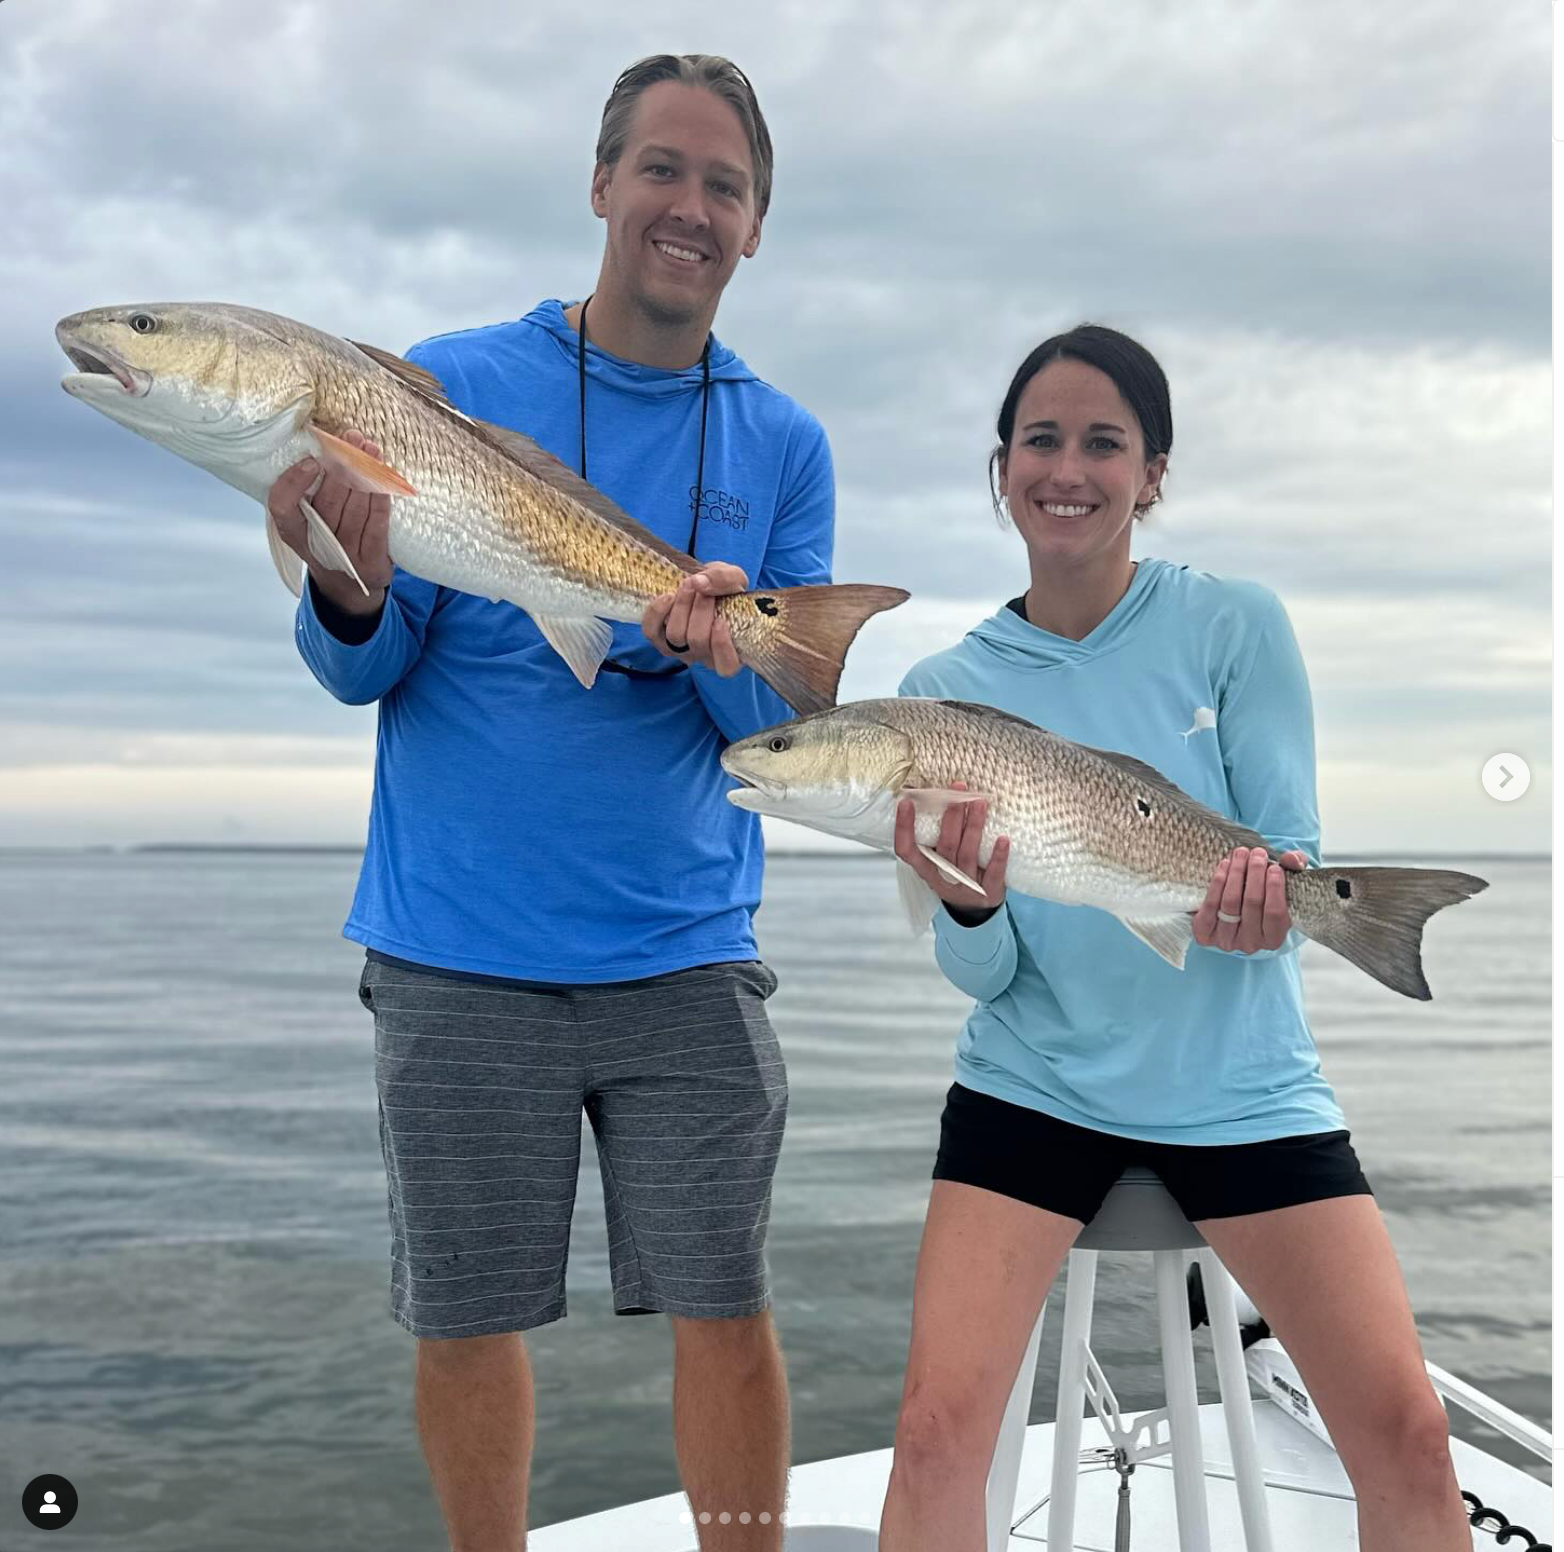 The week is off to a great start catching lots of redfish in the ocean, creeks and up on the flats. Book a trip with us today!